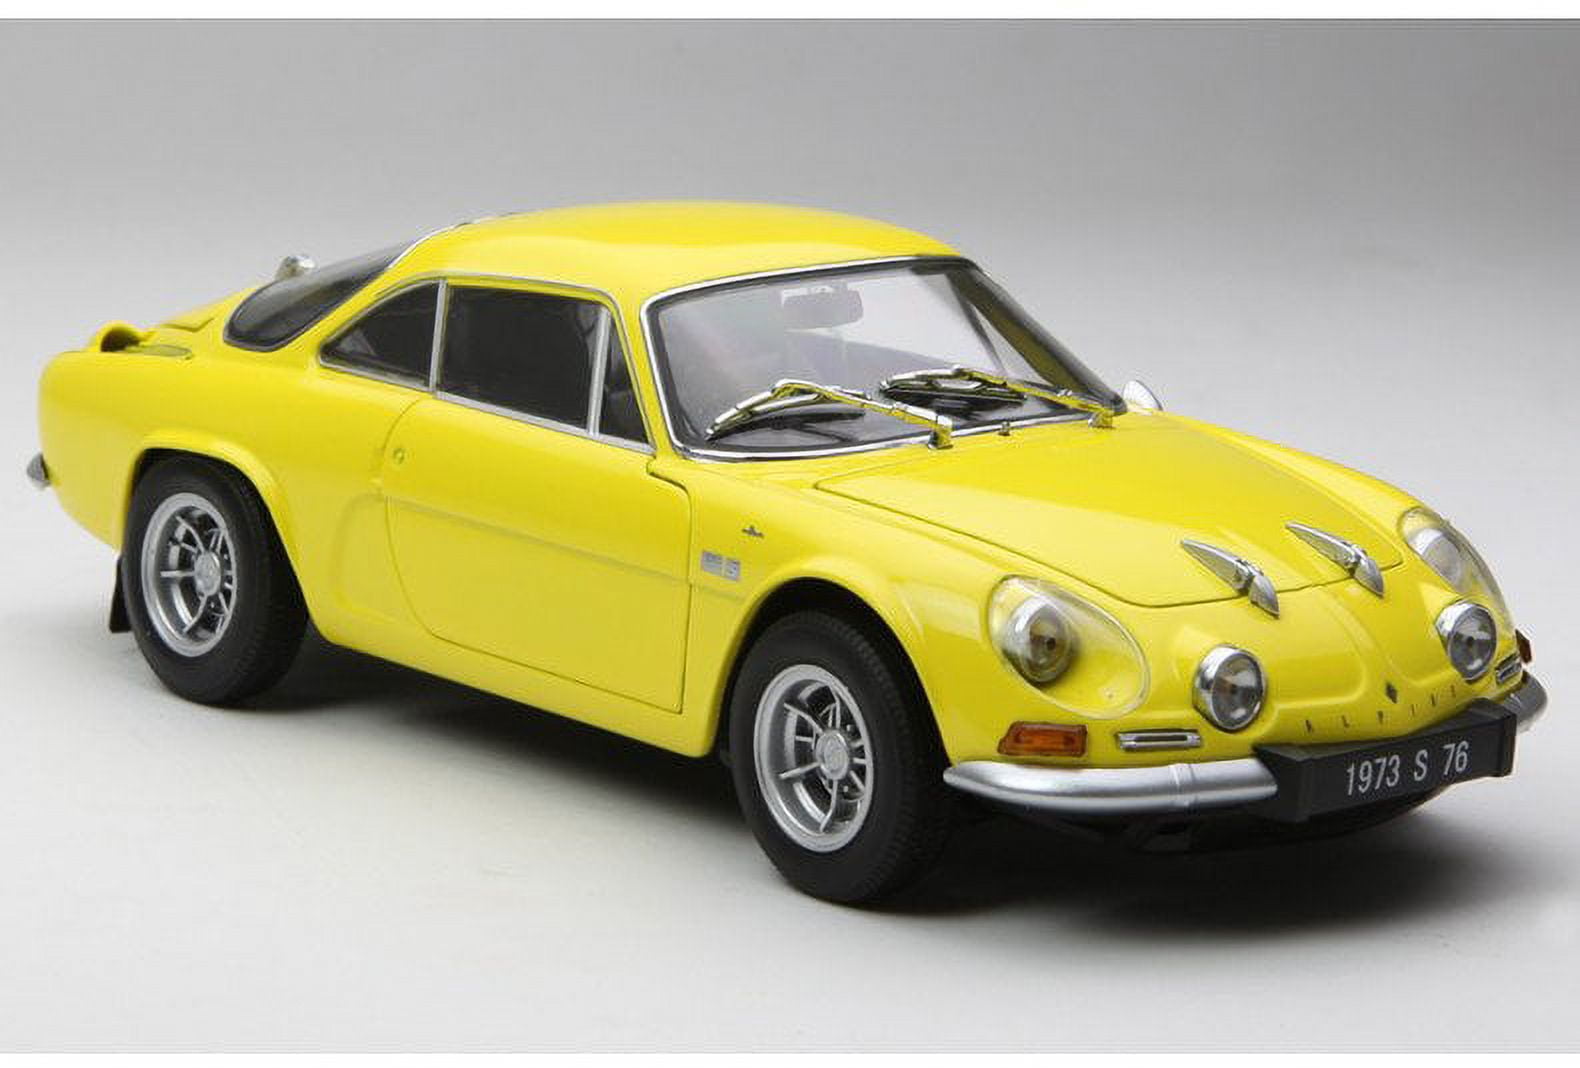 Renault Alpine A110 1600S Red 1/18 by Kyosho 08484